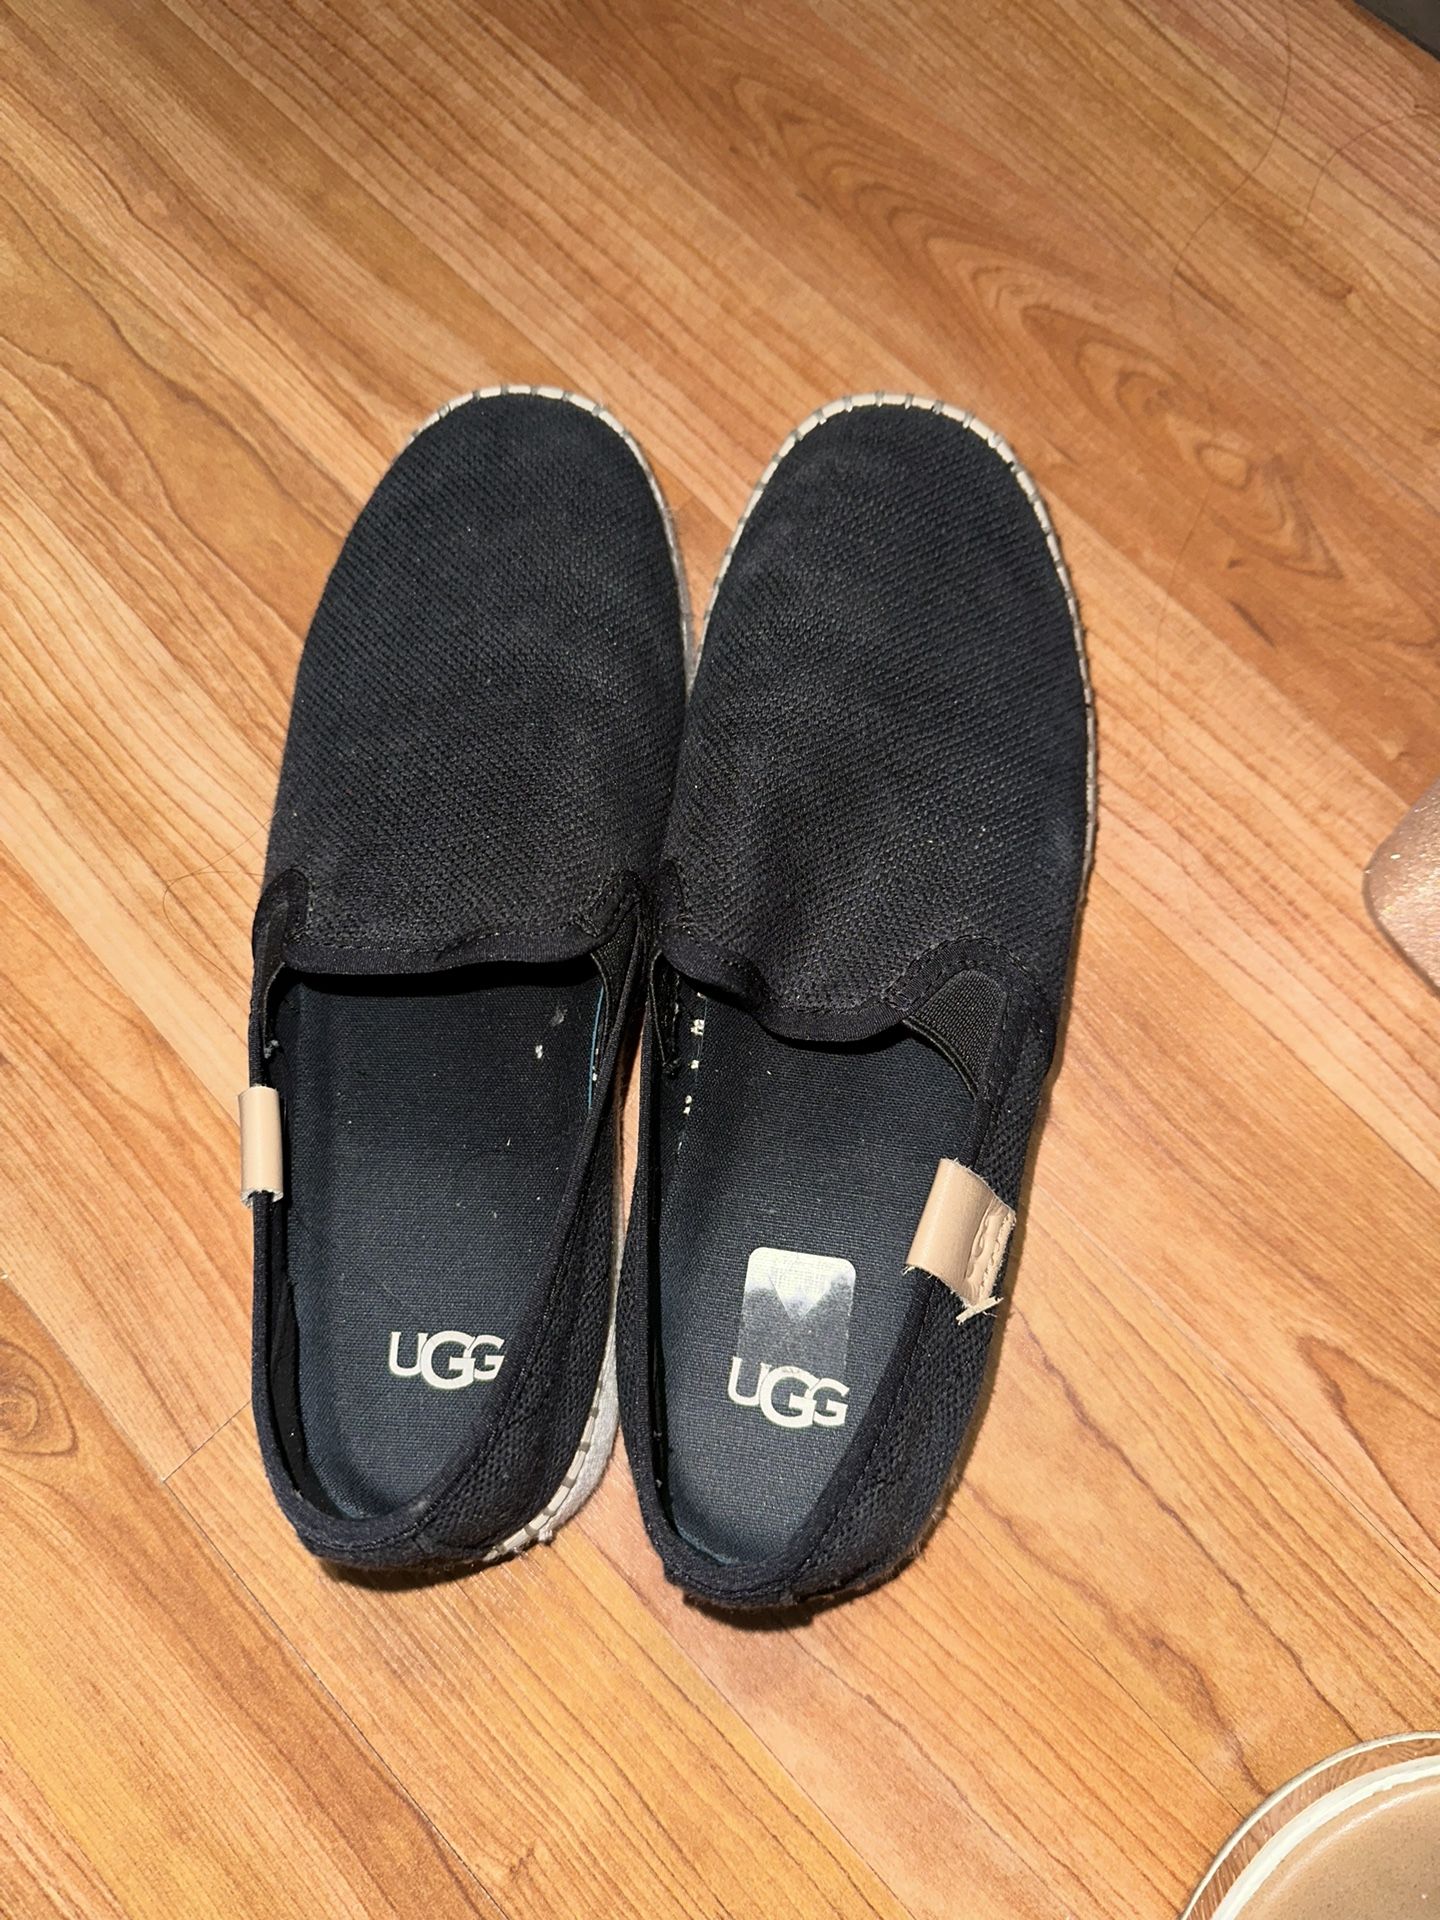 Uggs Slip Ons size 8.5 